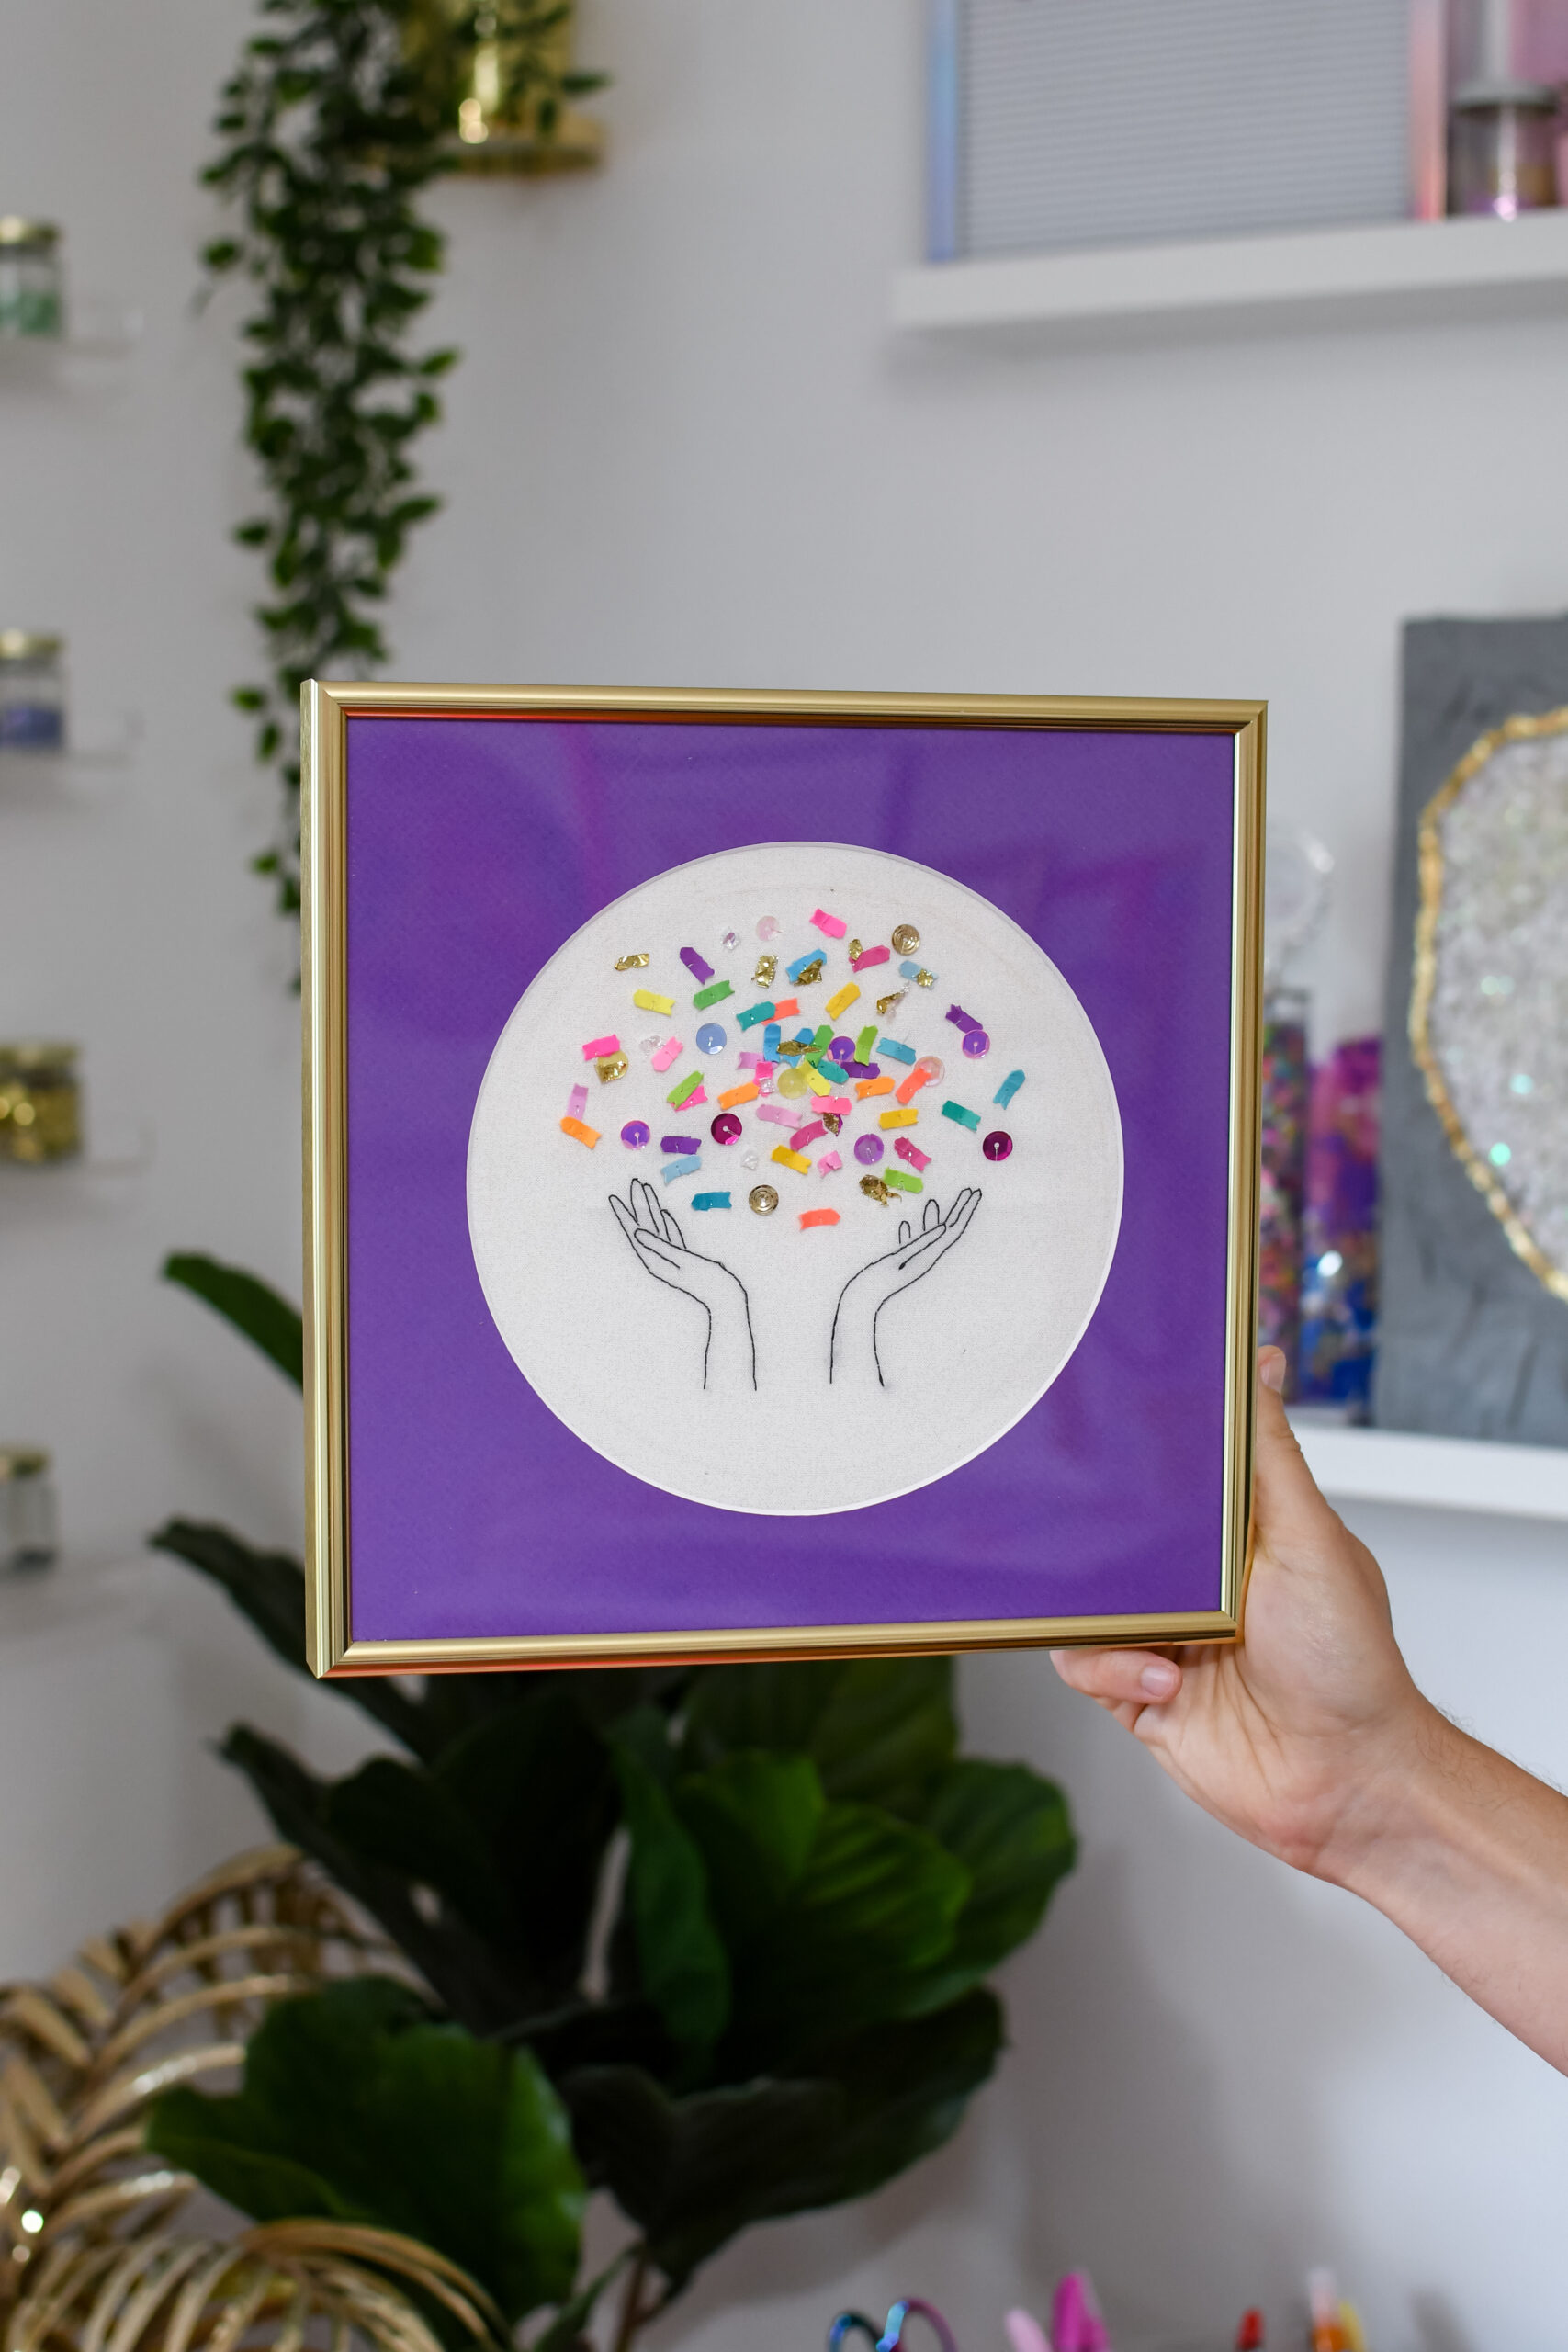 Wood Embroidery Hoop Frame Round/circle Decorative Display for Finished Cross  Stitch or Embroidery Hoop Art, Needlepoint, Crewel 